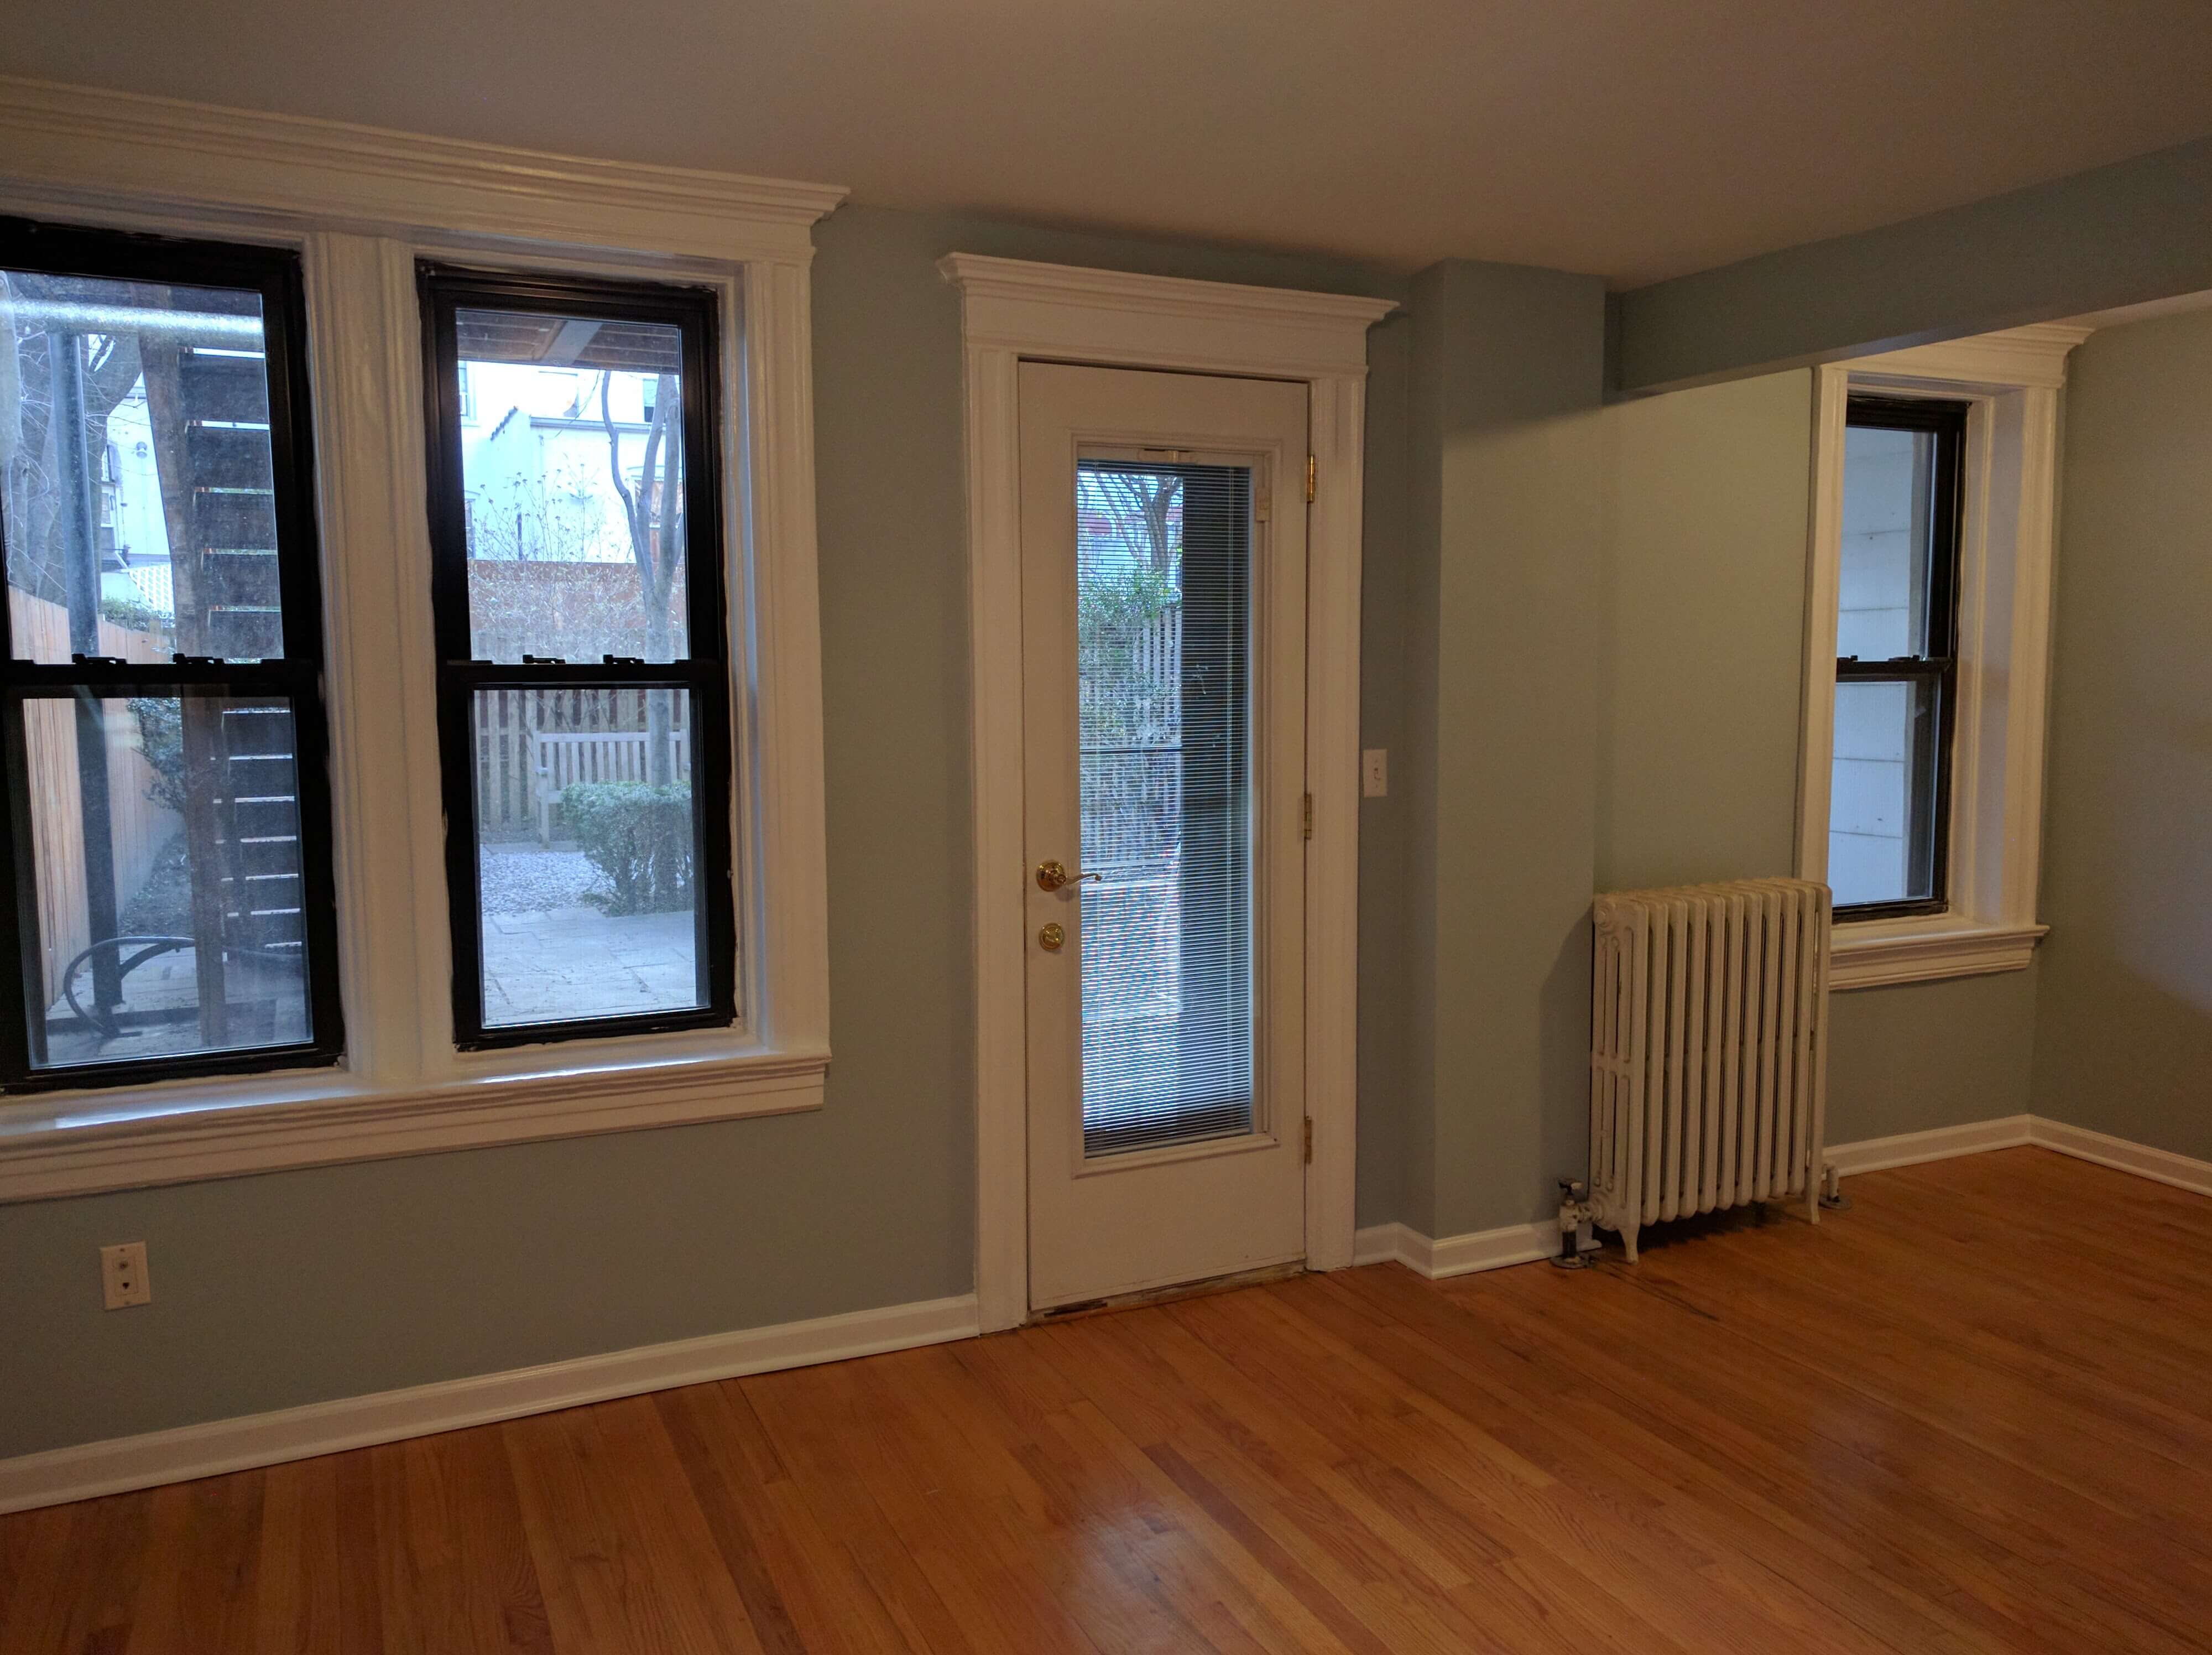 Brooklyn Apartments for Rent in Kensington at 236 E. 5th Street